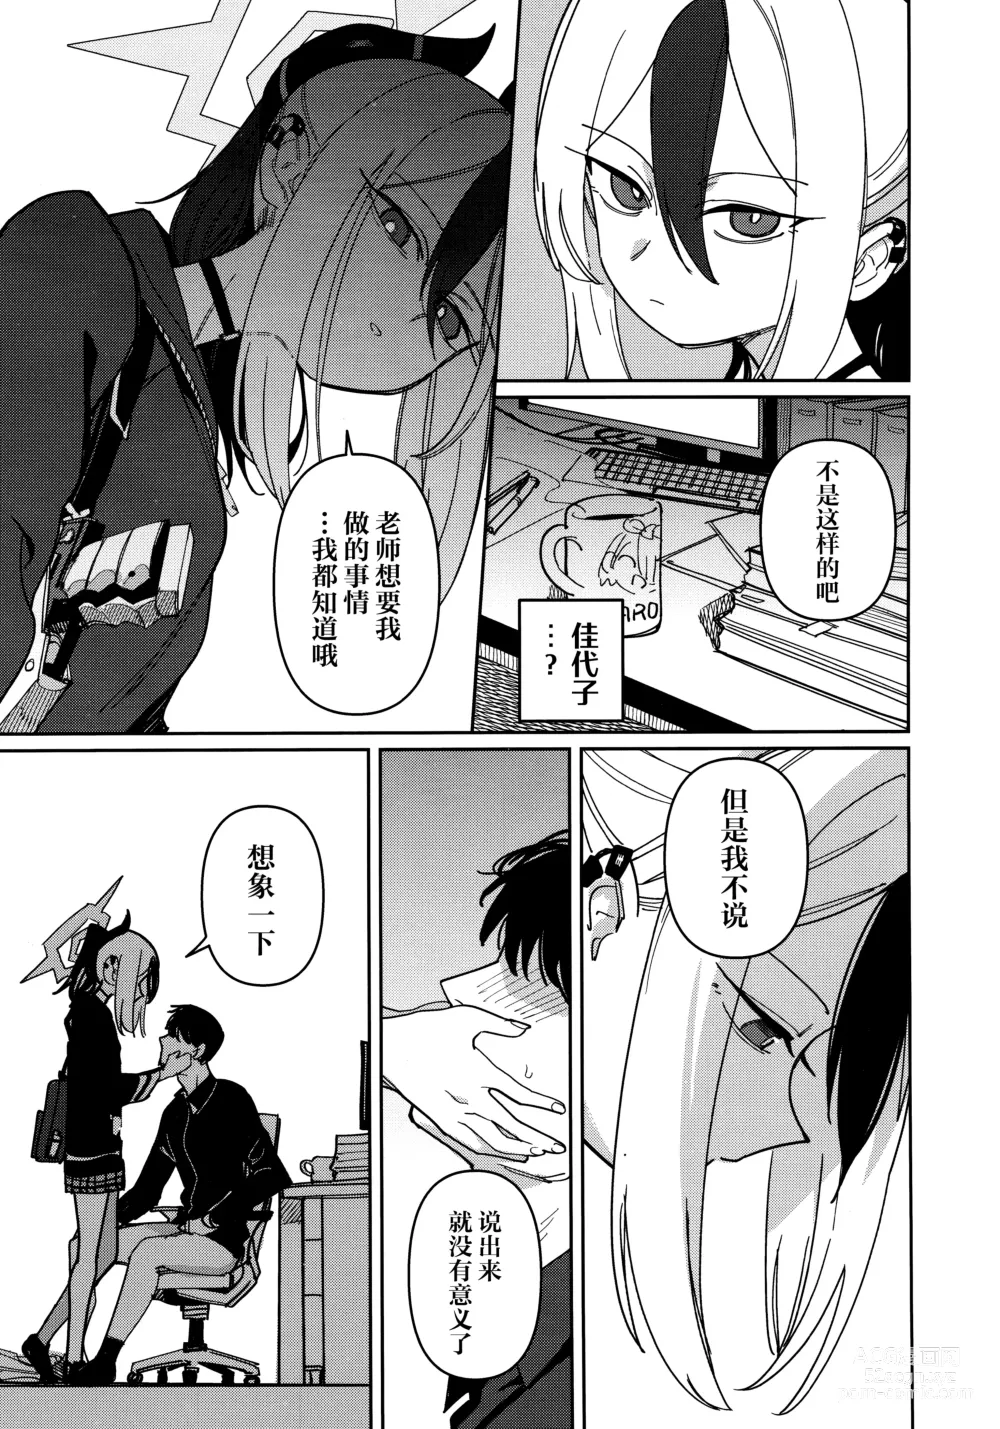 Page 7 of doujinshi 鬼方佳代子不会做这种事情 Part.2